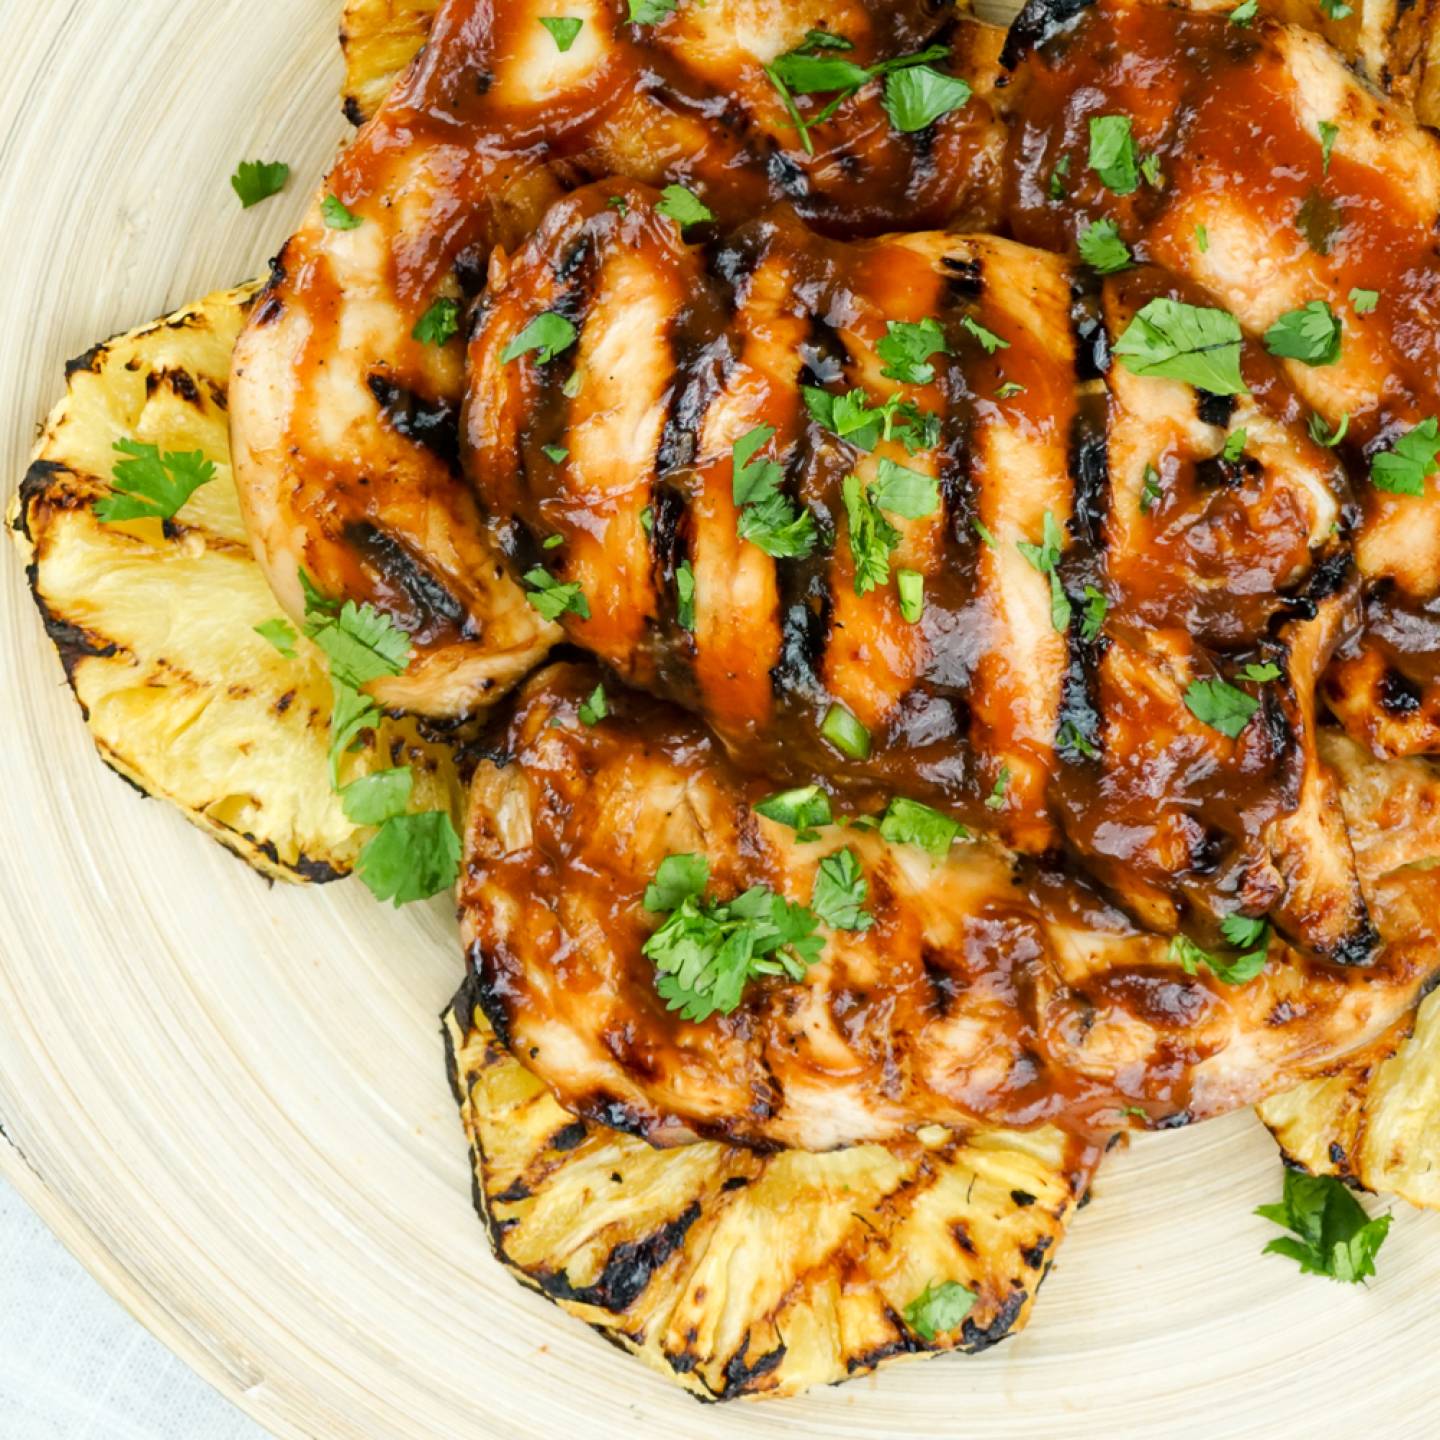 Grilled pineapple chicken with barbecue sauce and grilled pineapple rings.